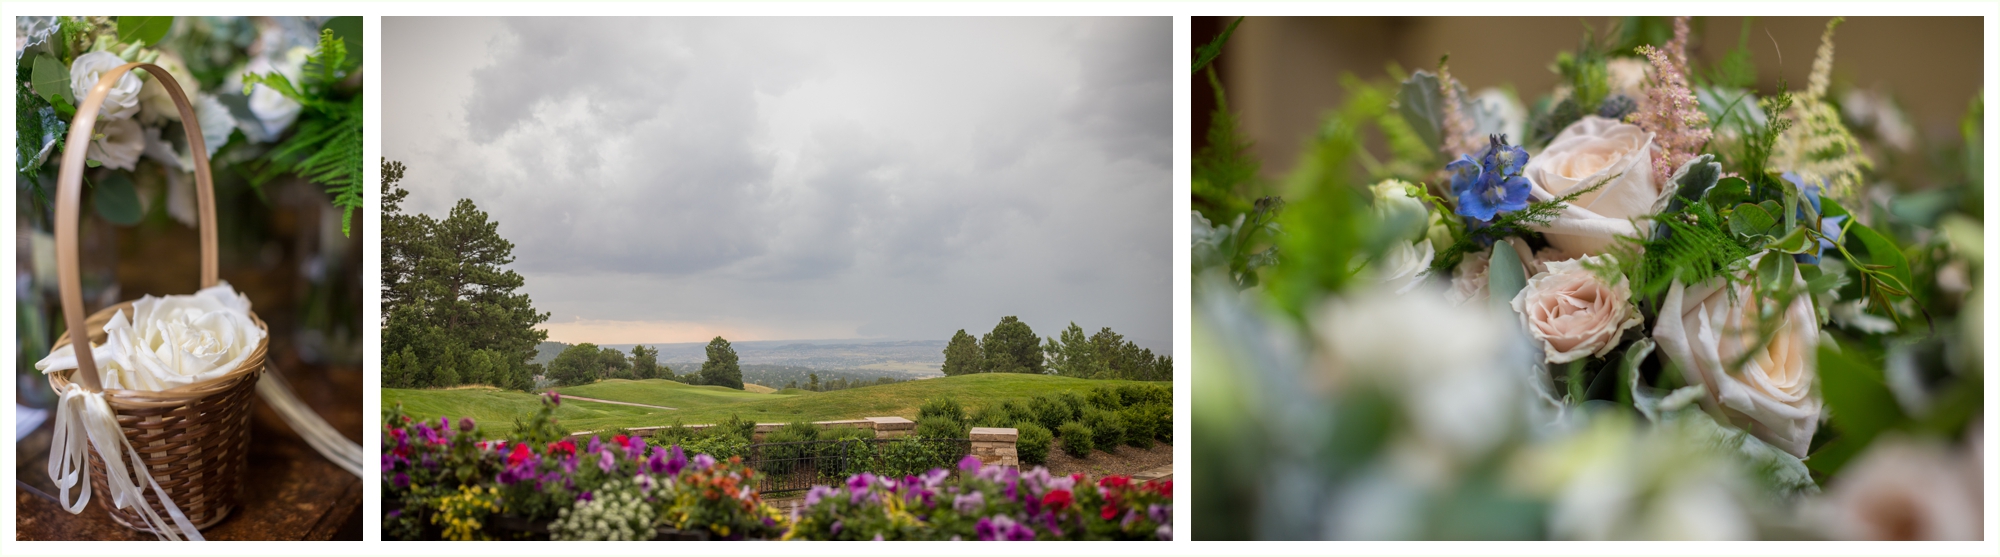 sanctuary golf course wedding ceremony views at beautiful july summer day 